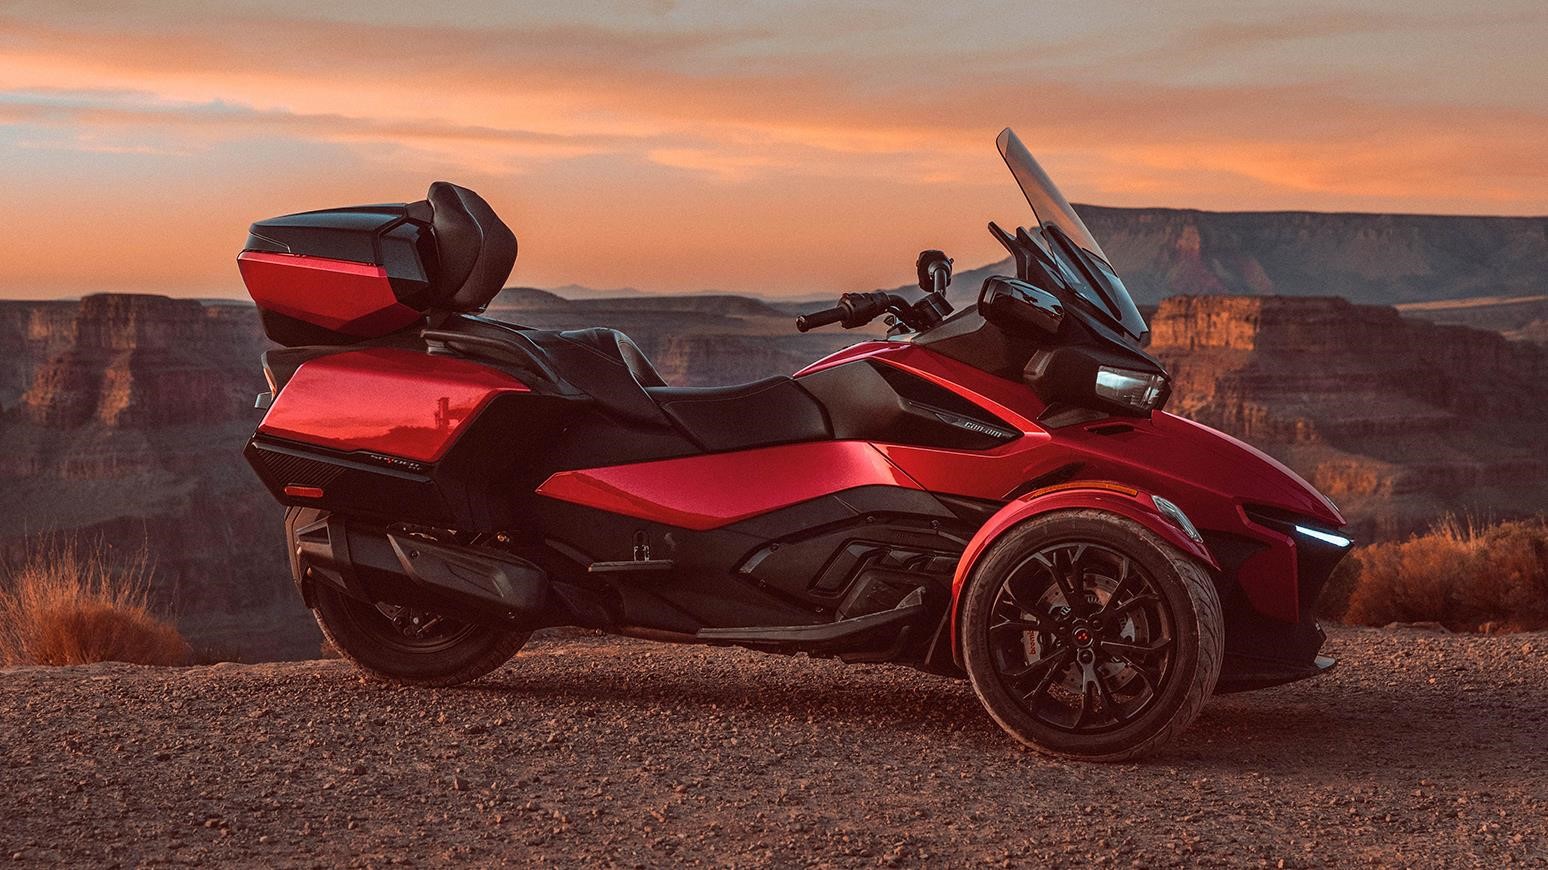 CanAm Spyder RT 3Wheeler & SkiDoo Expedition Extreme Snowmobile Win